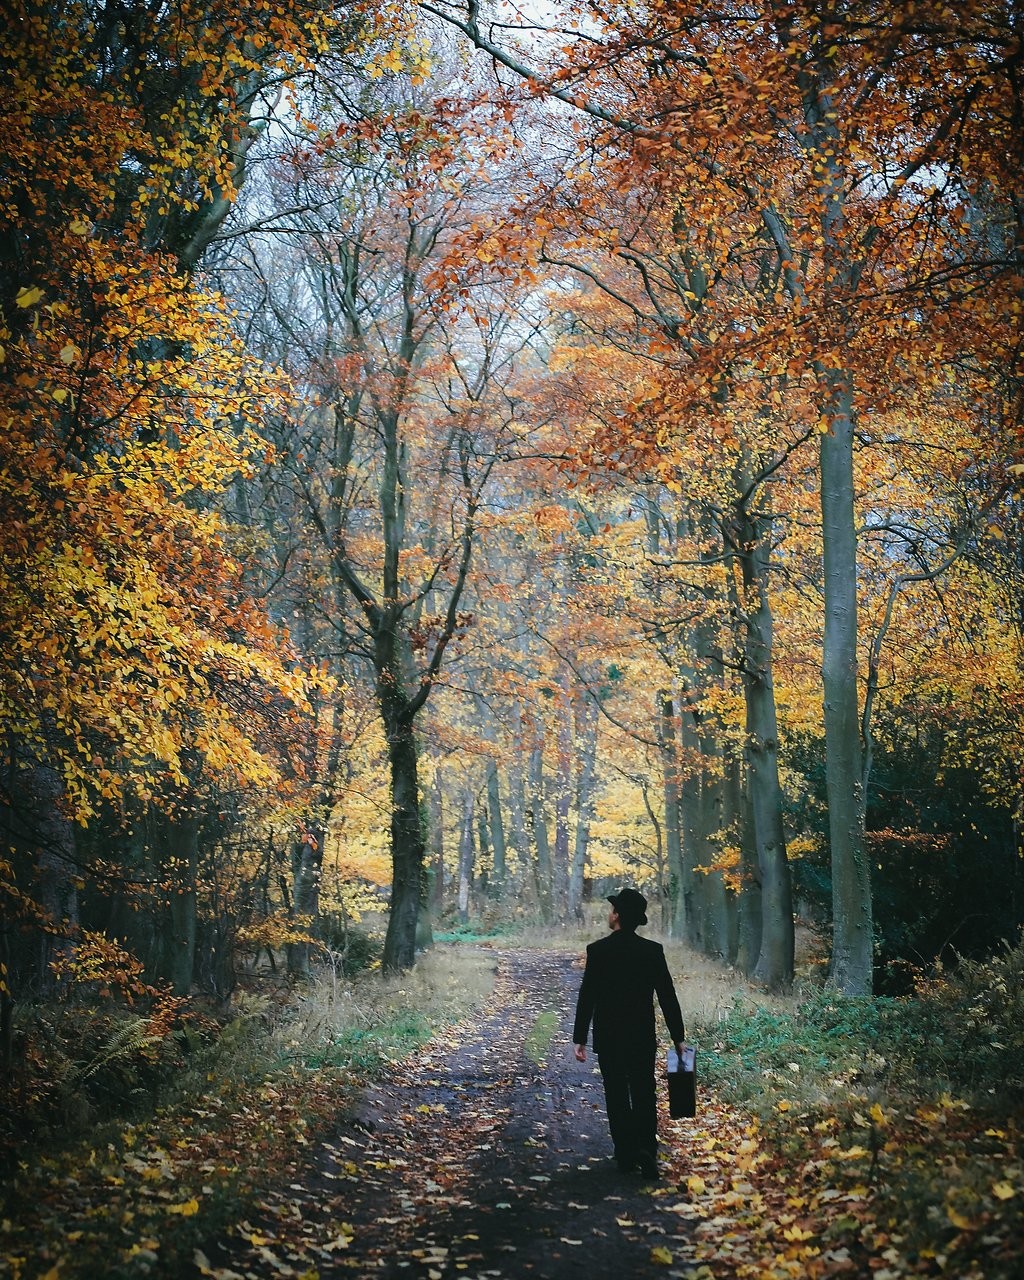 A Charlie Chaplinesque figure walking through the Autumnal leaves...I wonder where he is going?